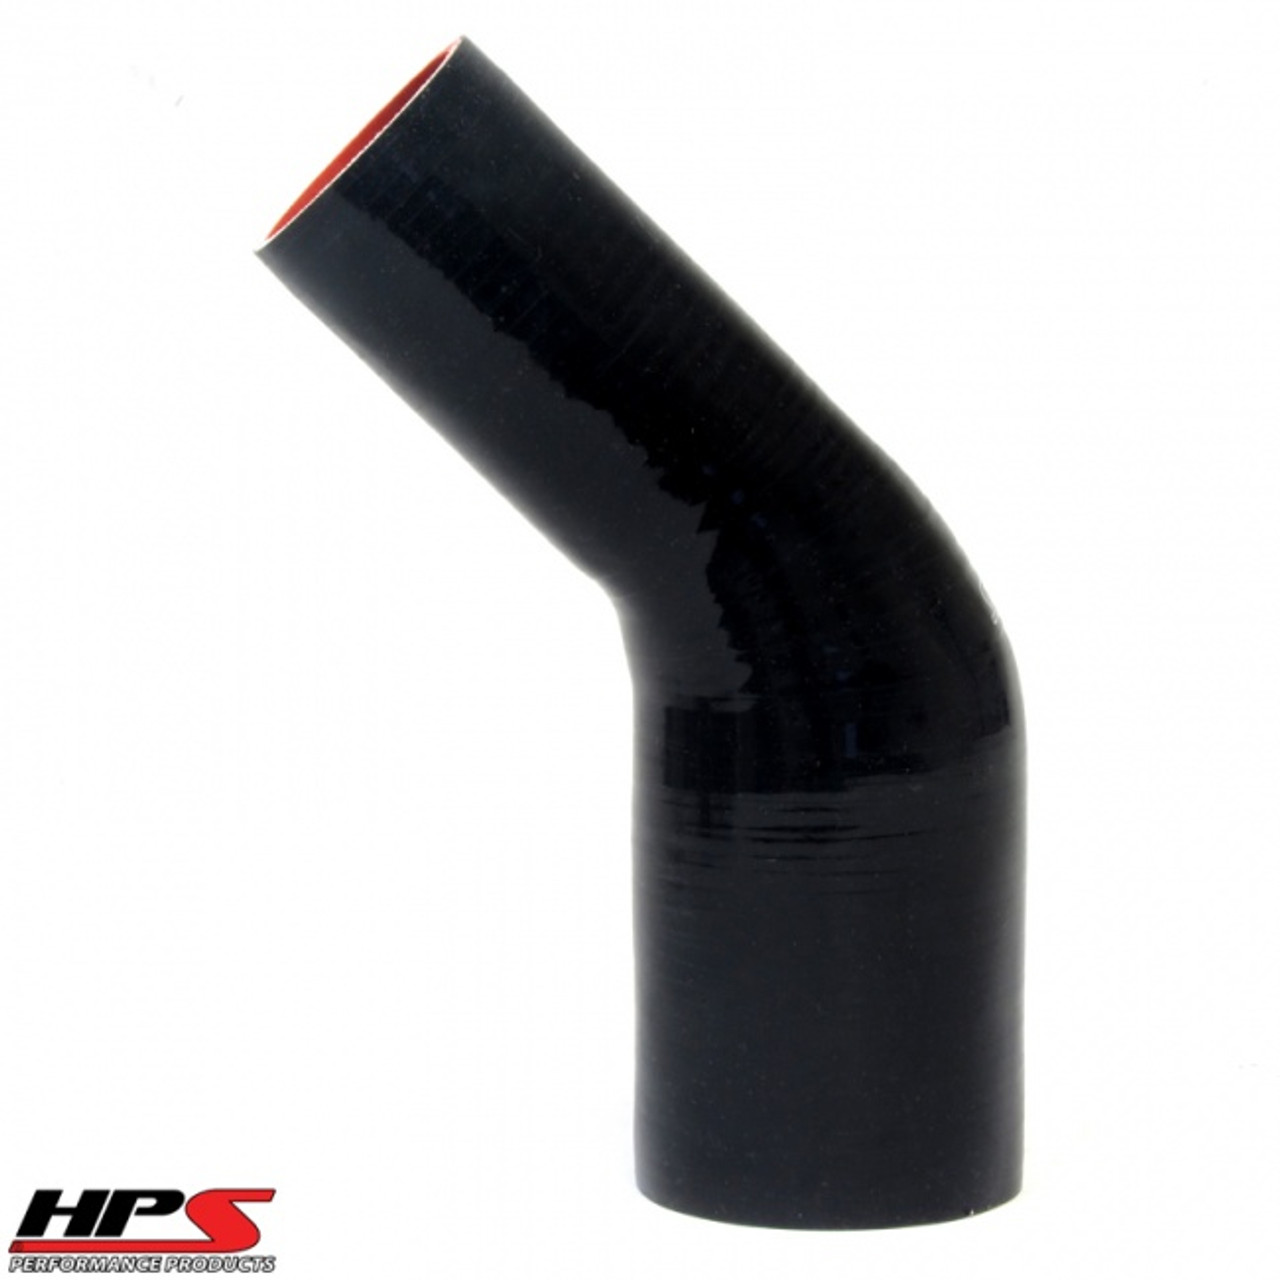 HPS 4 Ply Reinforced 45 Degree Silicone Hose Adapter 3.75" x 4" ID - Black